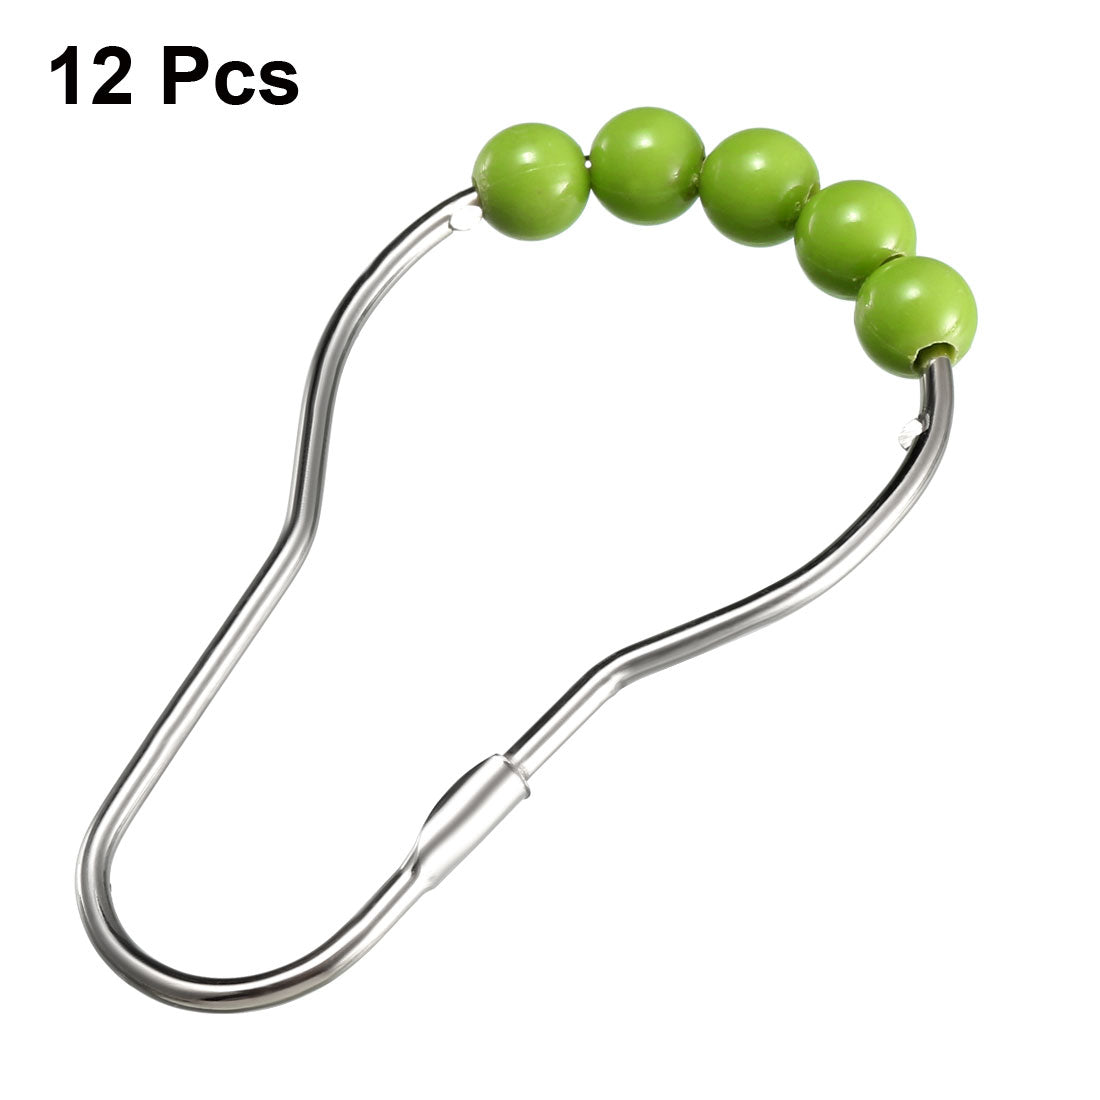 uxcell Uxcell Shower Curtain Ring Hooks Metal for Bathroom Shower Rods Curtains Liners Green Ball 12Pcs